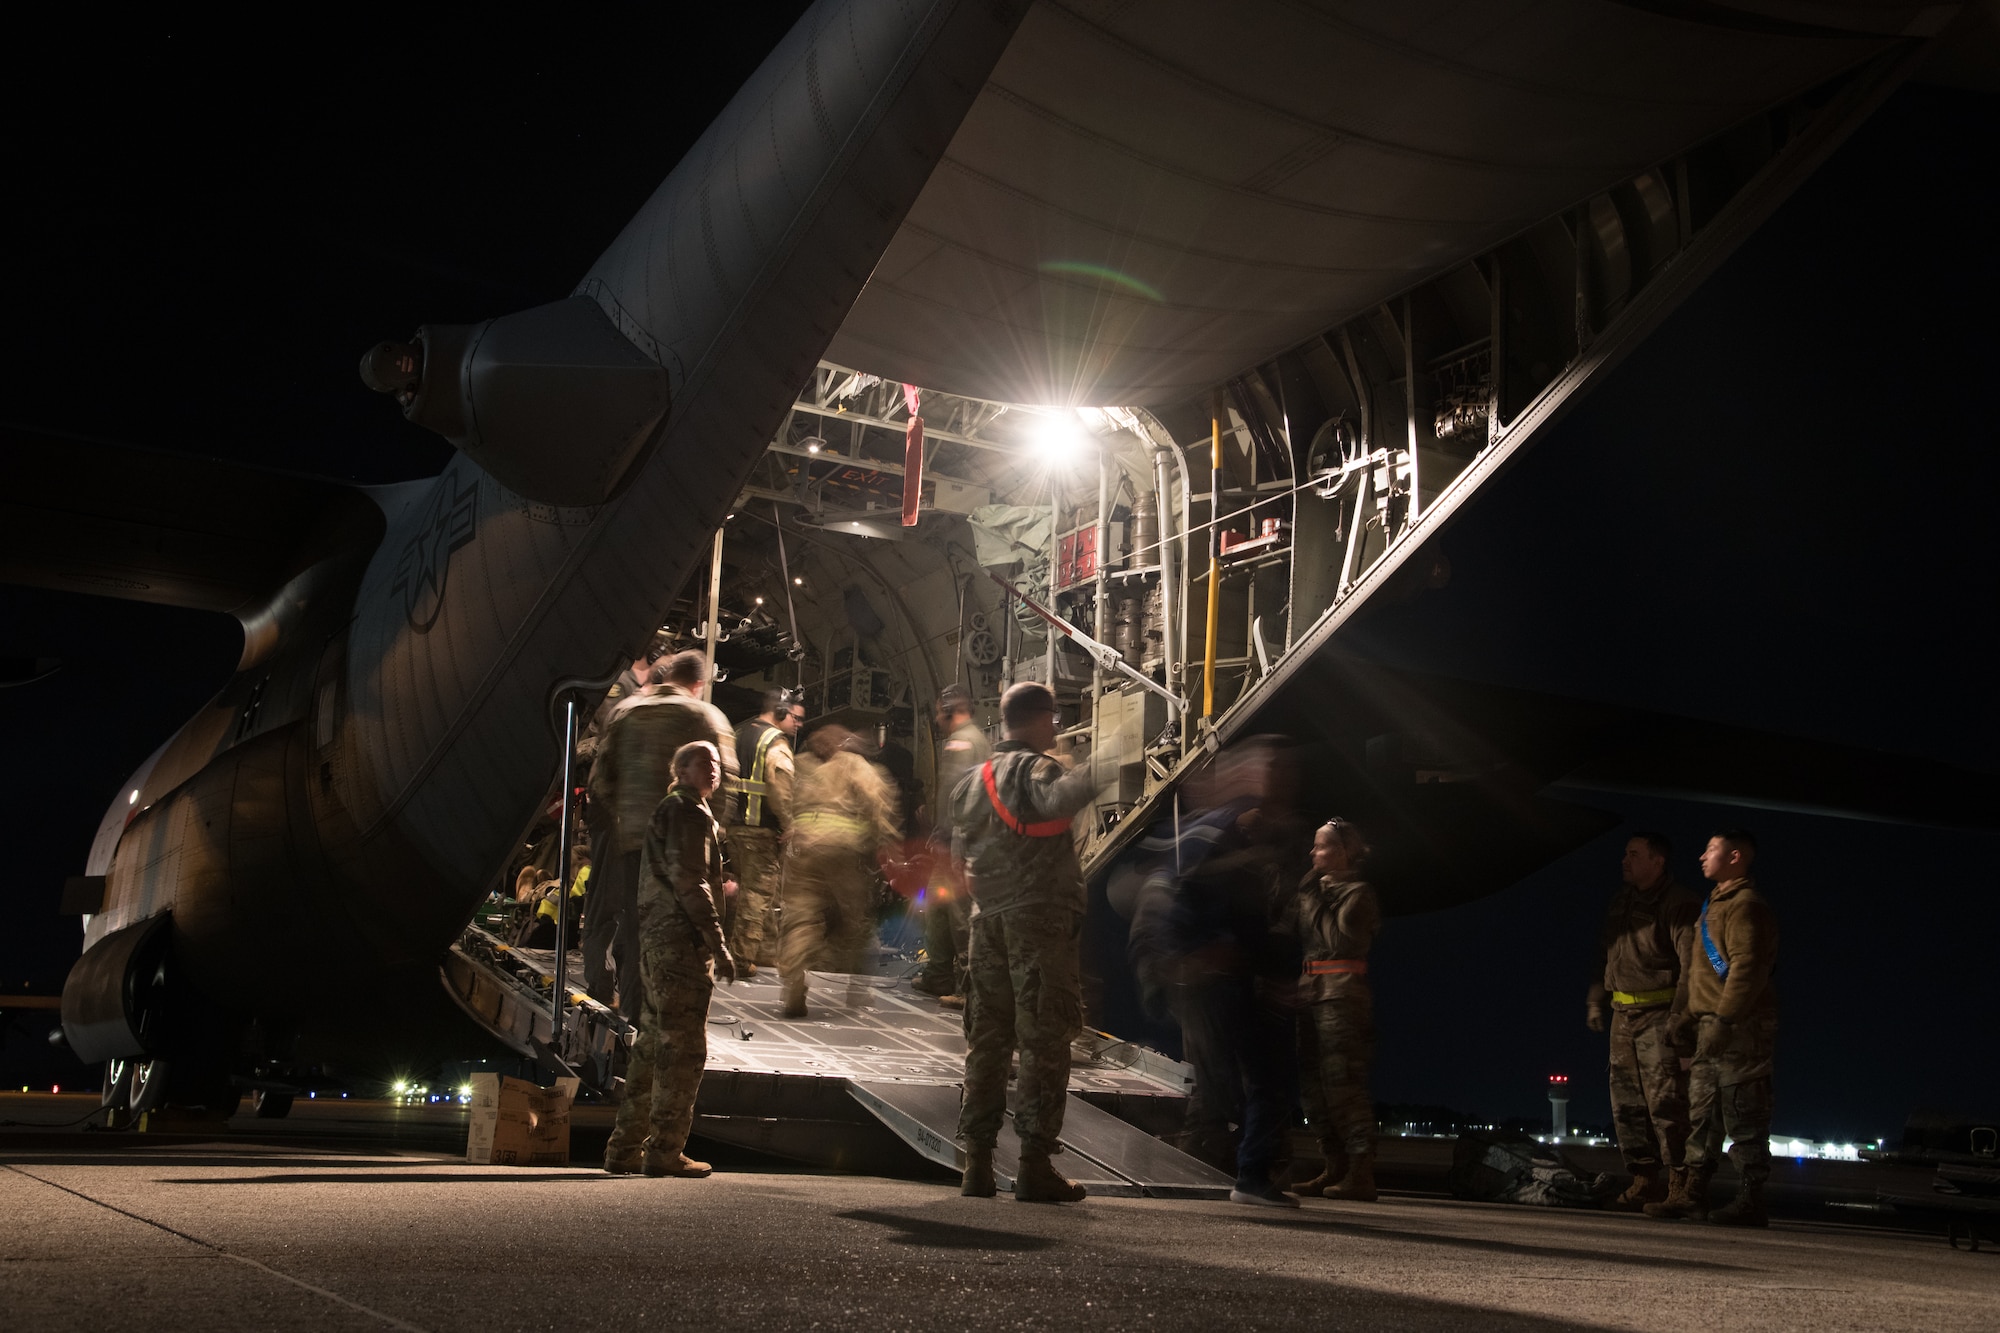 Blurry Airmen move in and out of the cargo bay of an in-focus parked C-130 at night transporting patients and medical equipment.